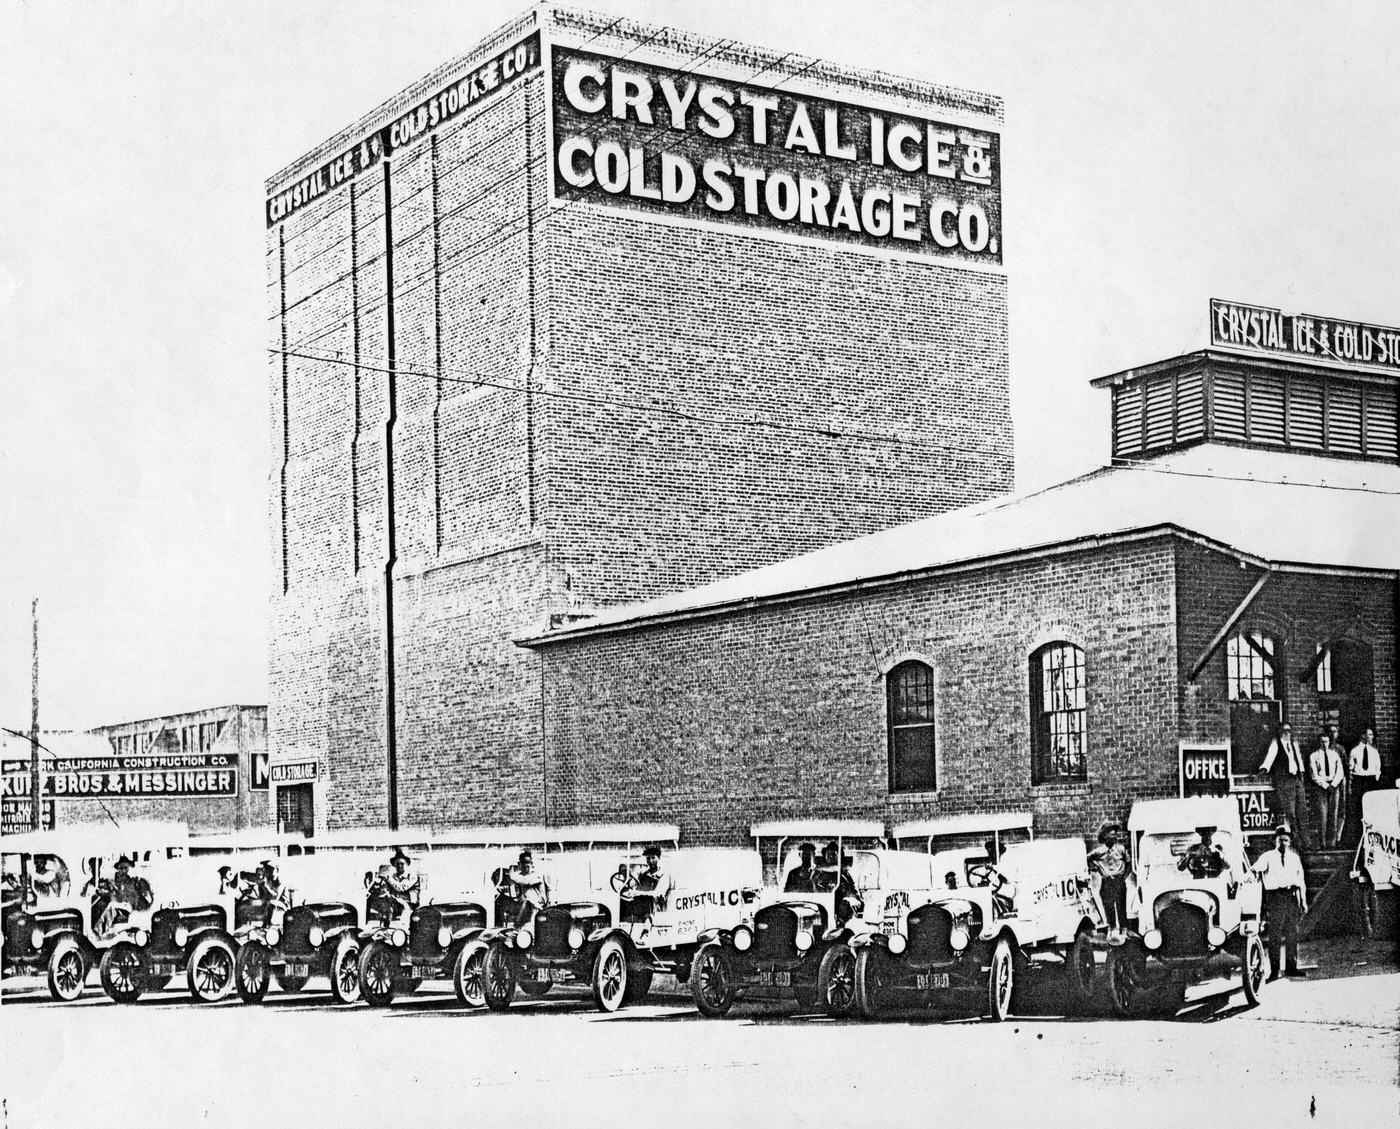 Crystal Ice & Cold Storage Co.: Exterior of Building and Trucks, 1930s